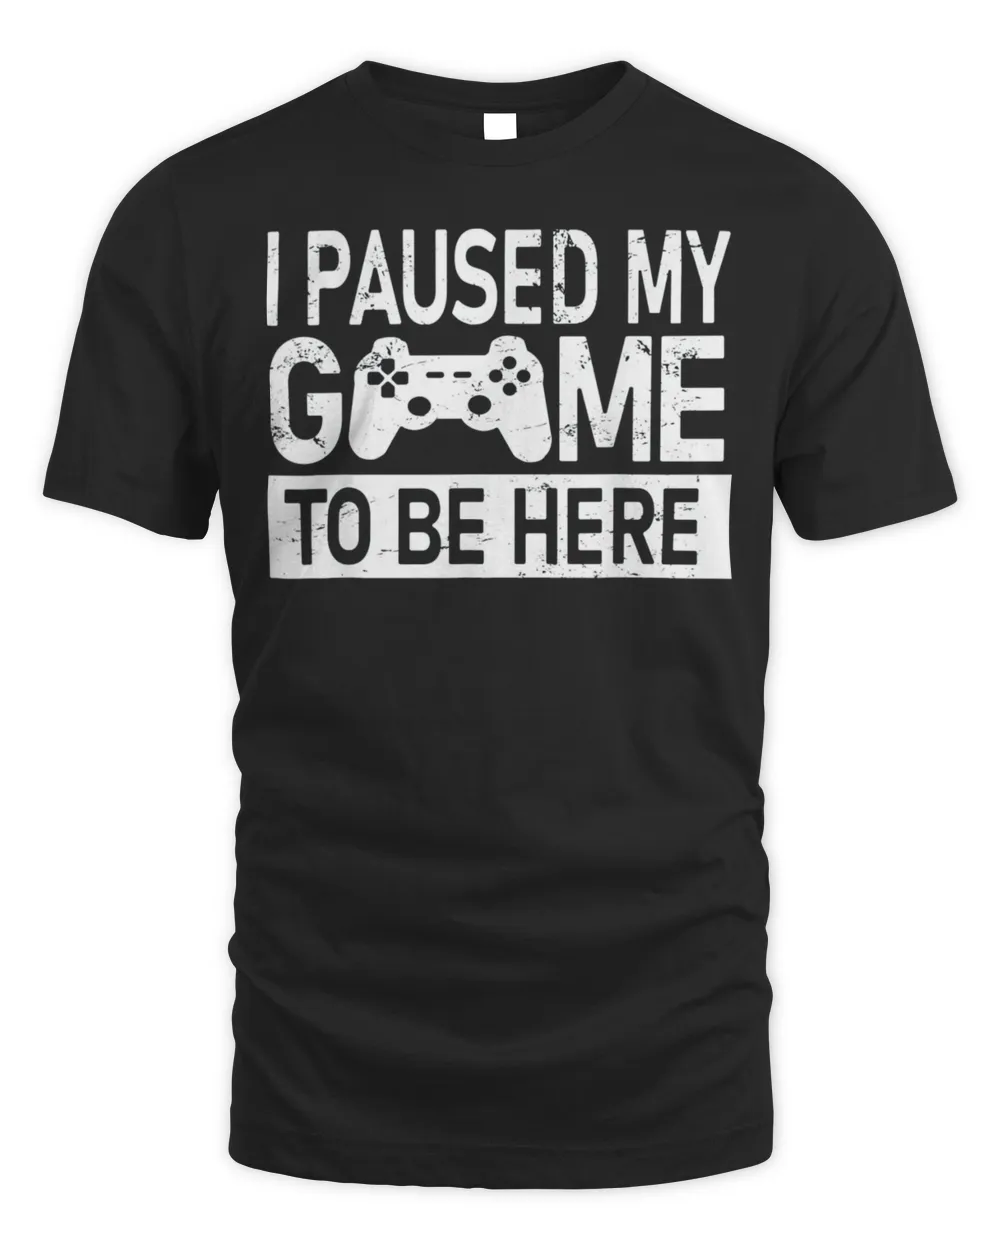 I Paused My Game To Be Here Tee Shirt